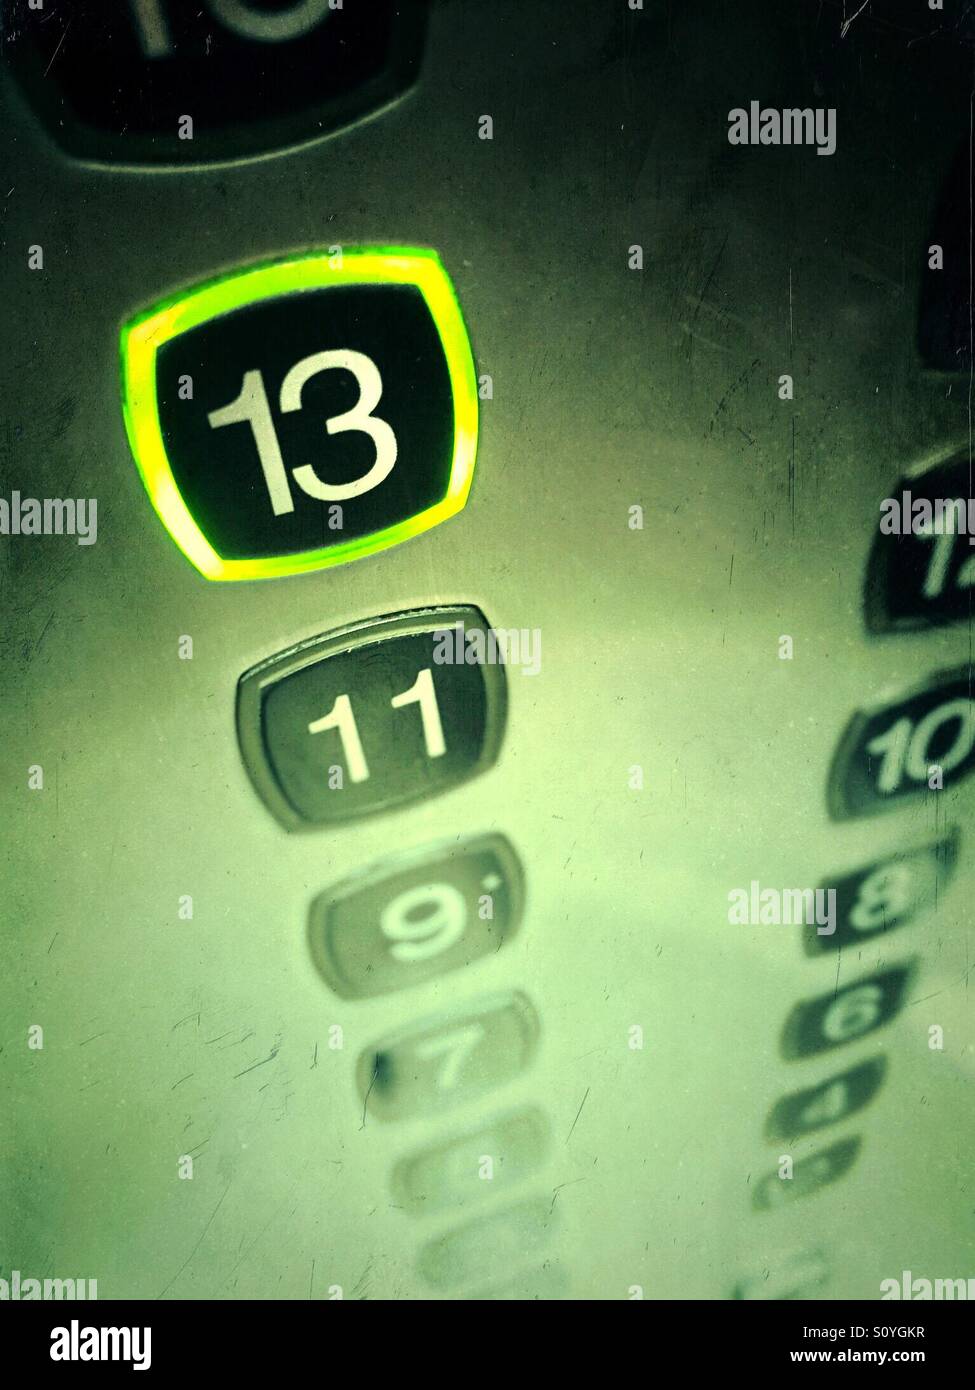 13th floor button pushed in an elevator Stock Photo